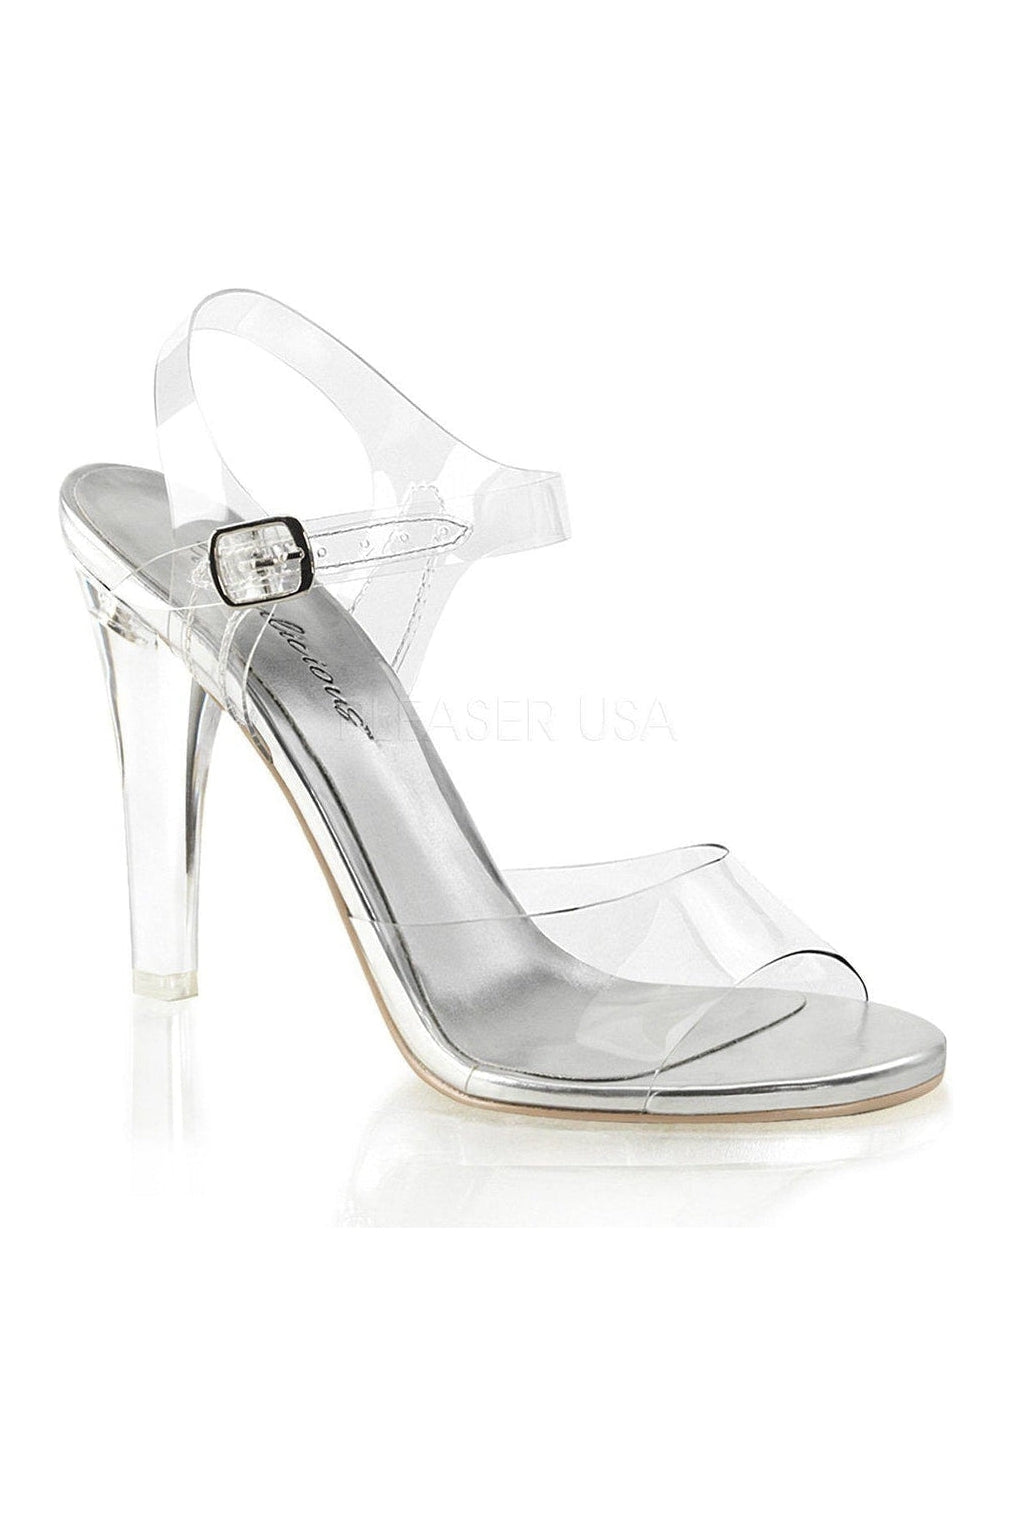 CLEARLY-408 Sandal | Clear Vinyl-Fabulicious-Clear-Sandals-SEXYSHOES.COM